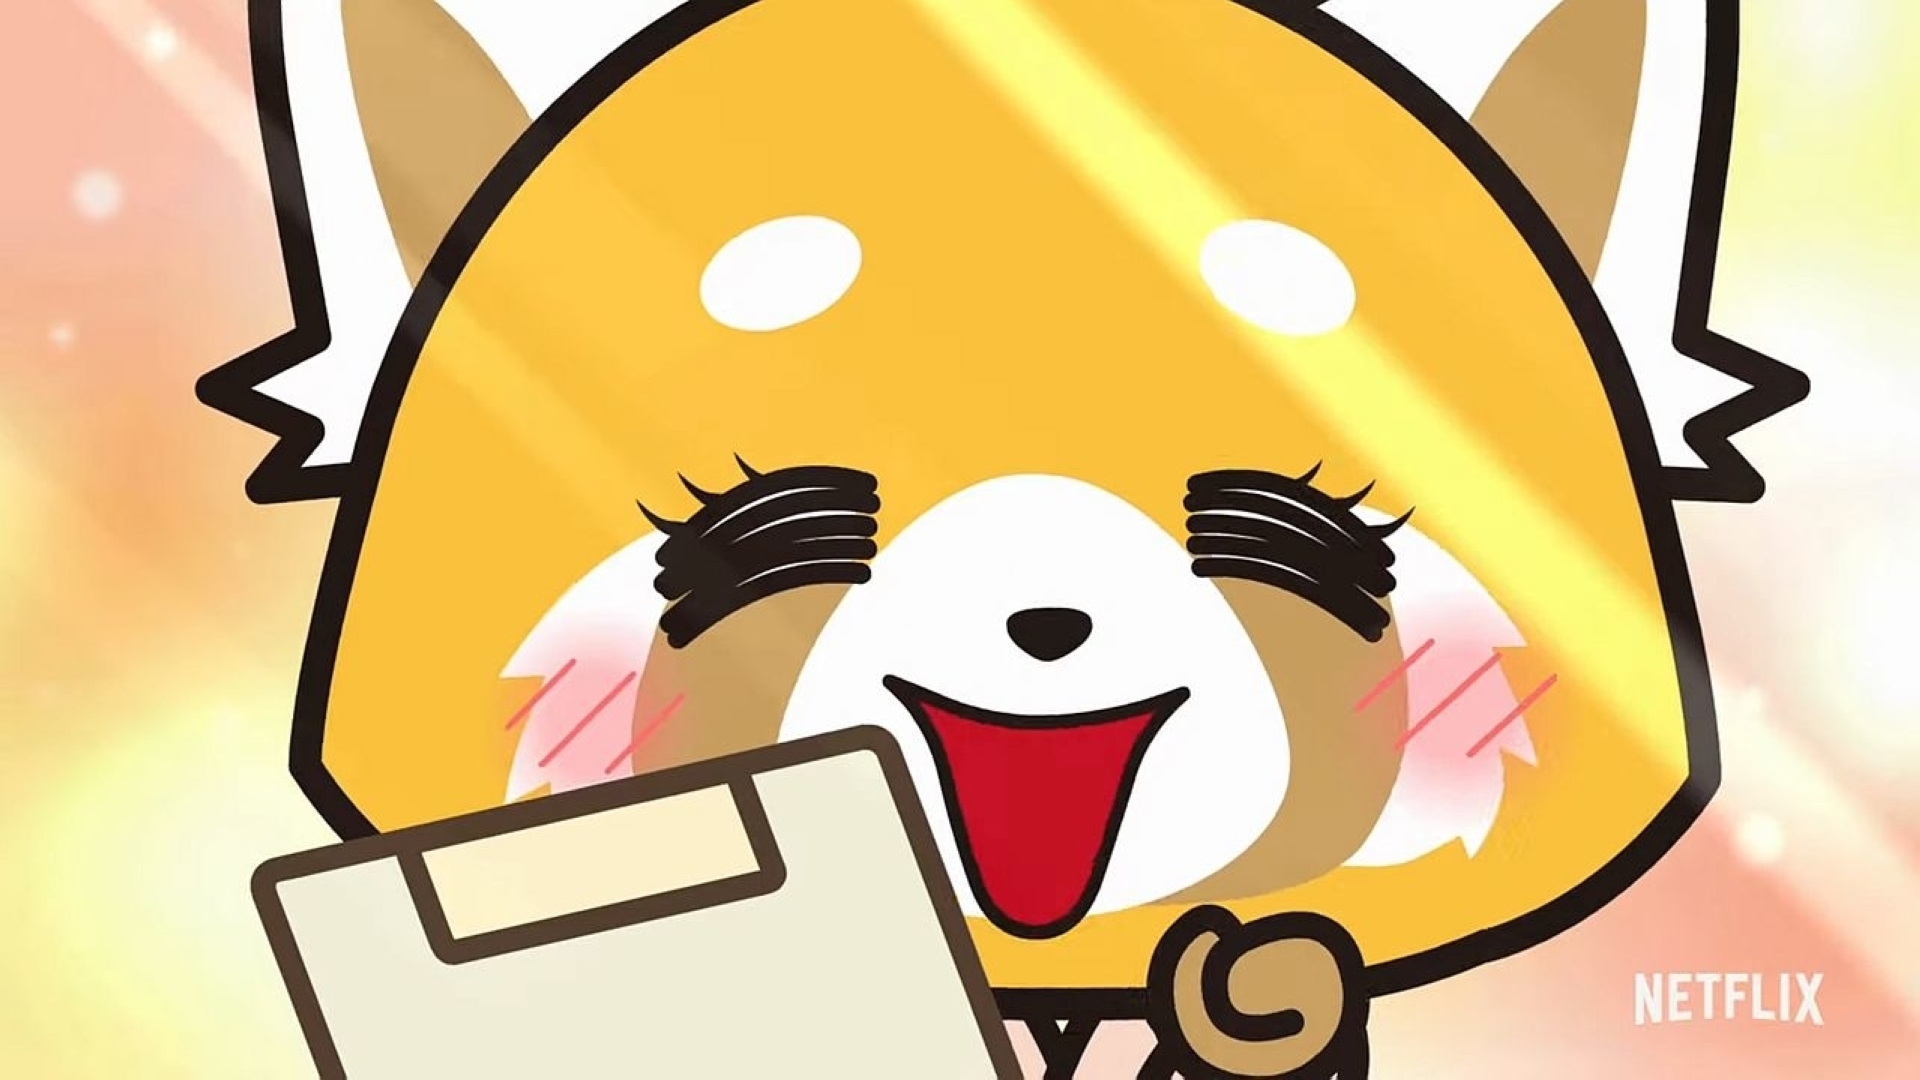 Free download Aggretsuko brings sweet red pandas rage and office  friendships to [1920x1080] for your Desktop, Mobile & Tablet | Explore 34+  Red Panda Aggretsuko Wallpapers | Red Panda Wallpapers, Red Panda